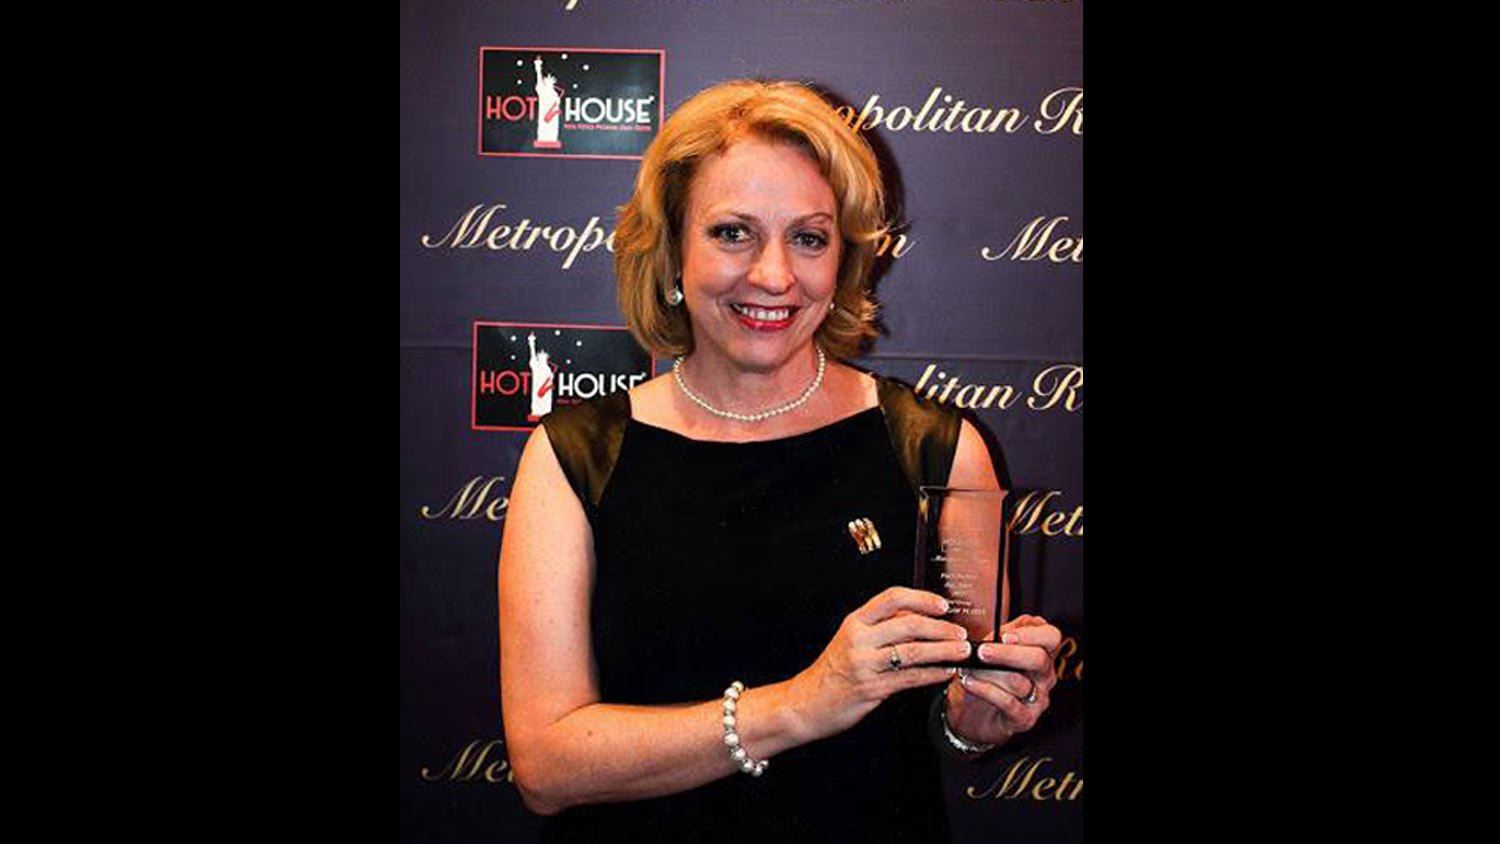   Jeanne accepting String of Pearls ‘ award for “Best Group” in the 2015 Hot House Jazz / Metropolitan Room NYC Jazz Fans Decision  